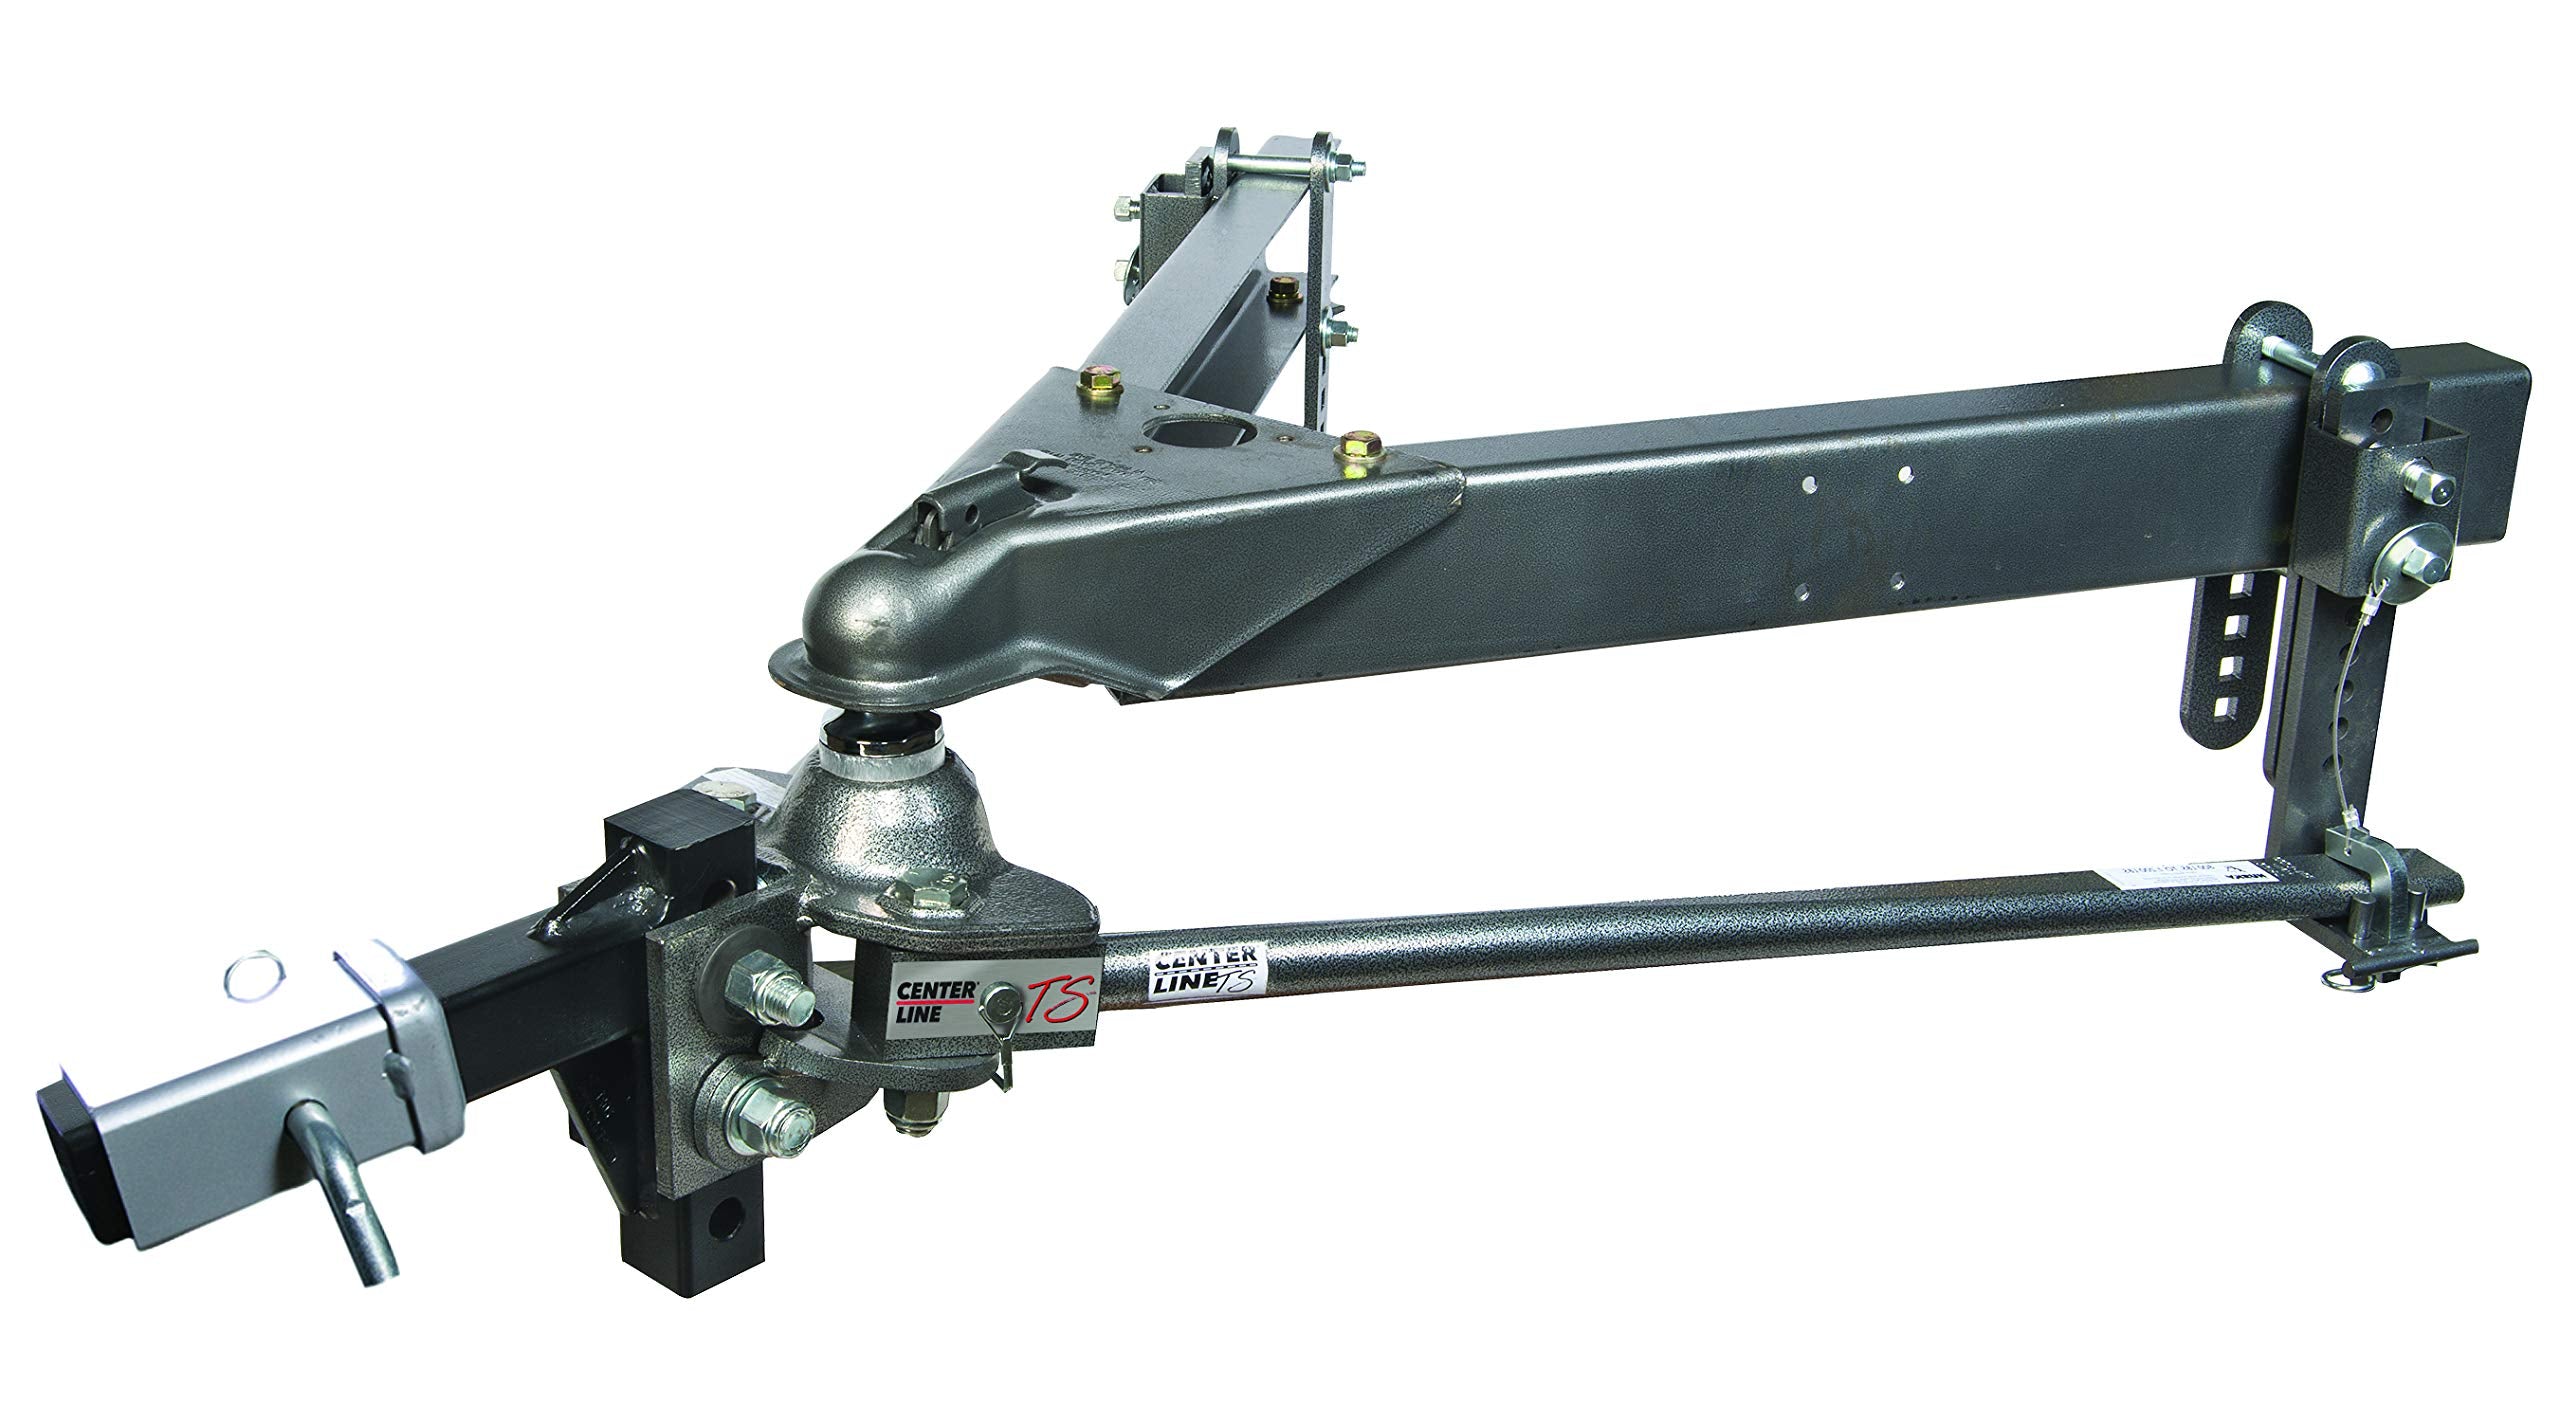 Husky 33039 Center Line TS 1000lb to 1400lb Weight Distribution Hitch